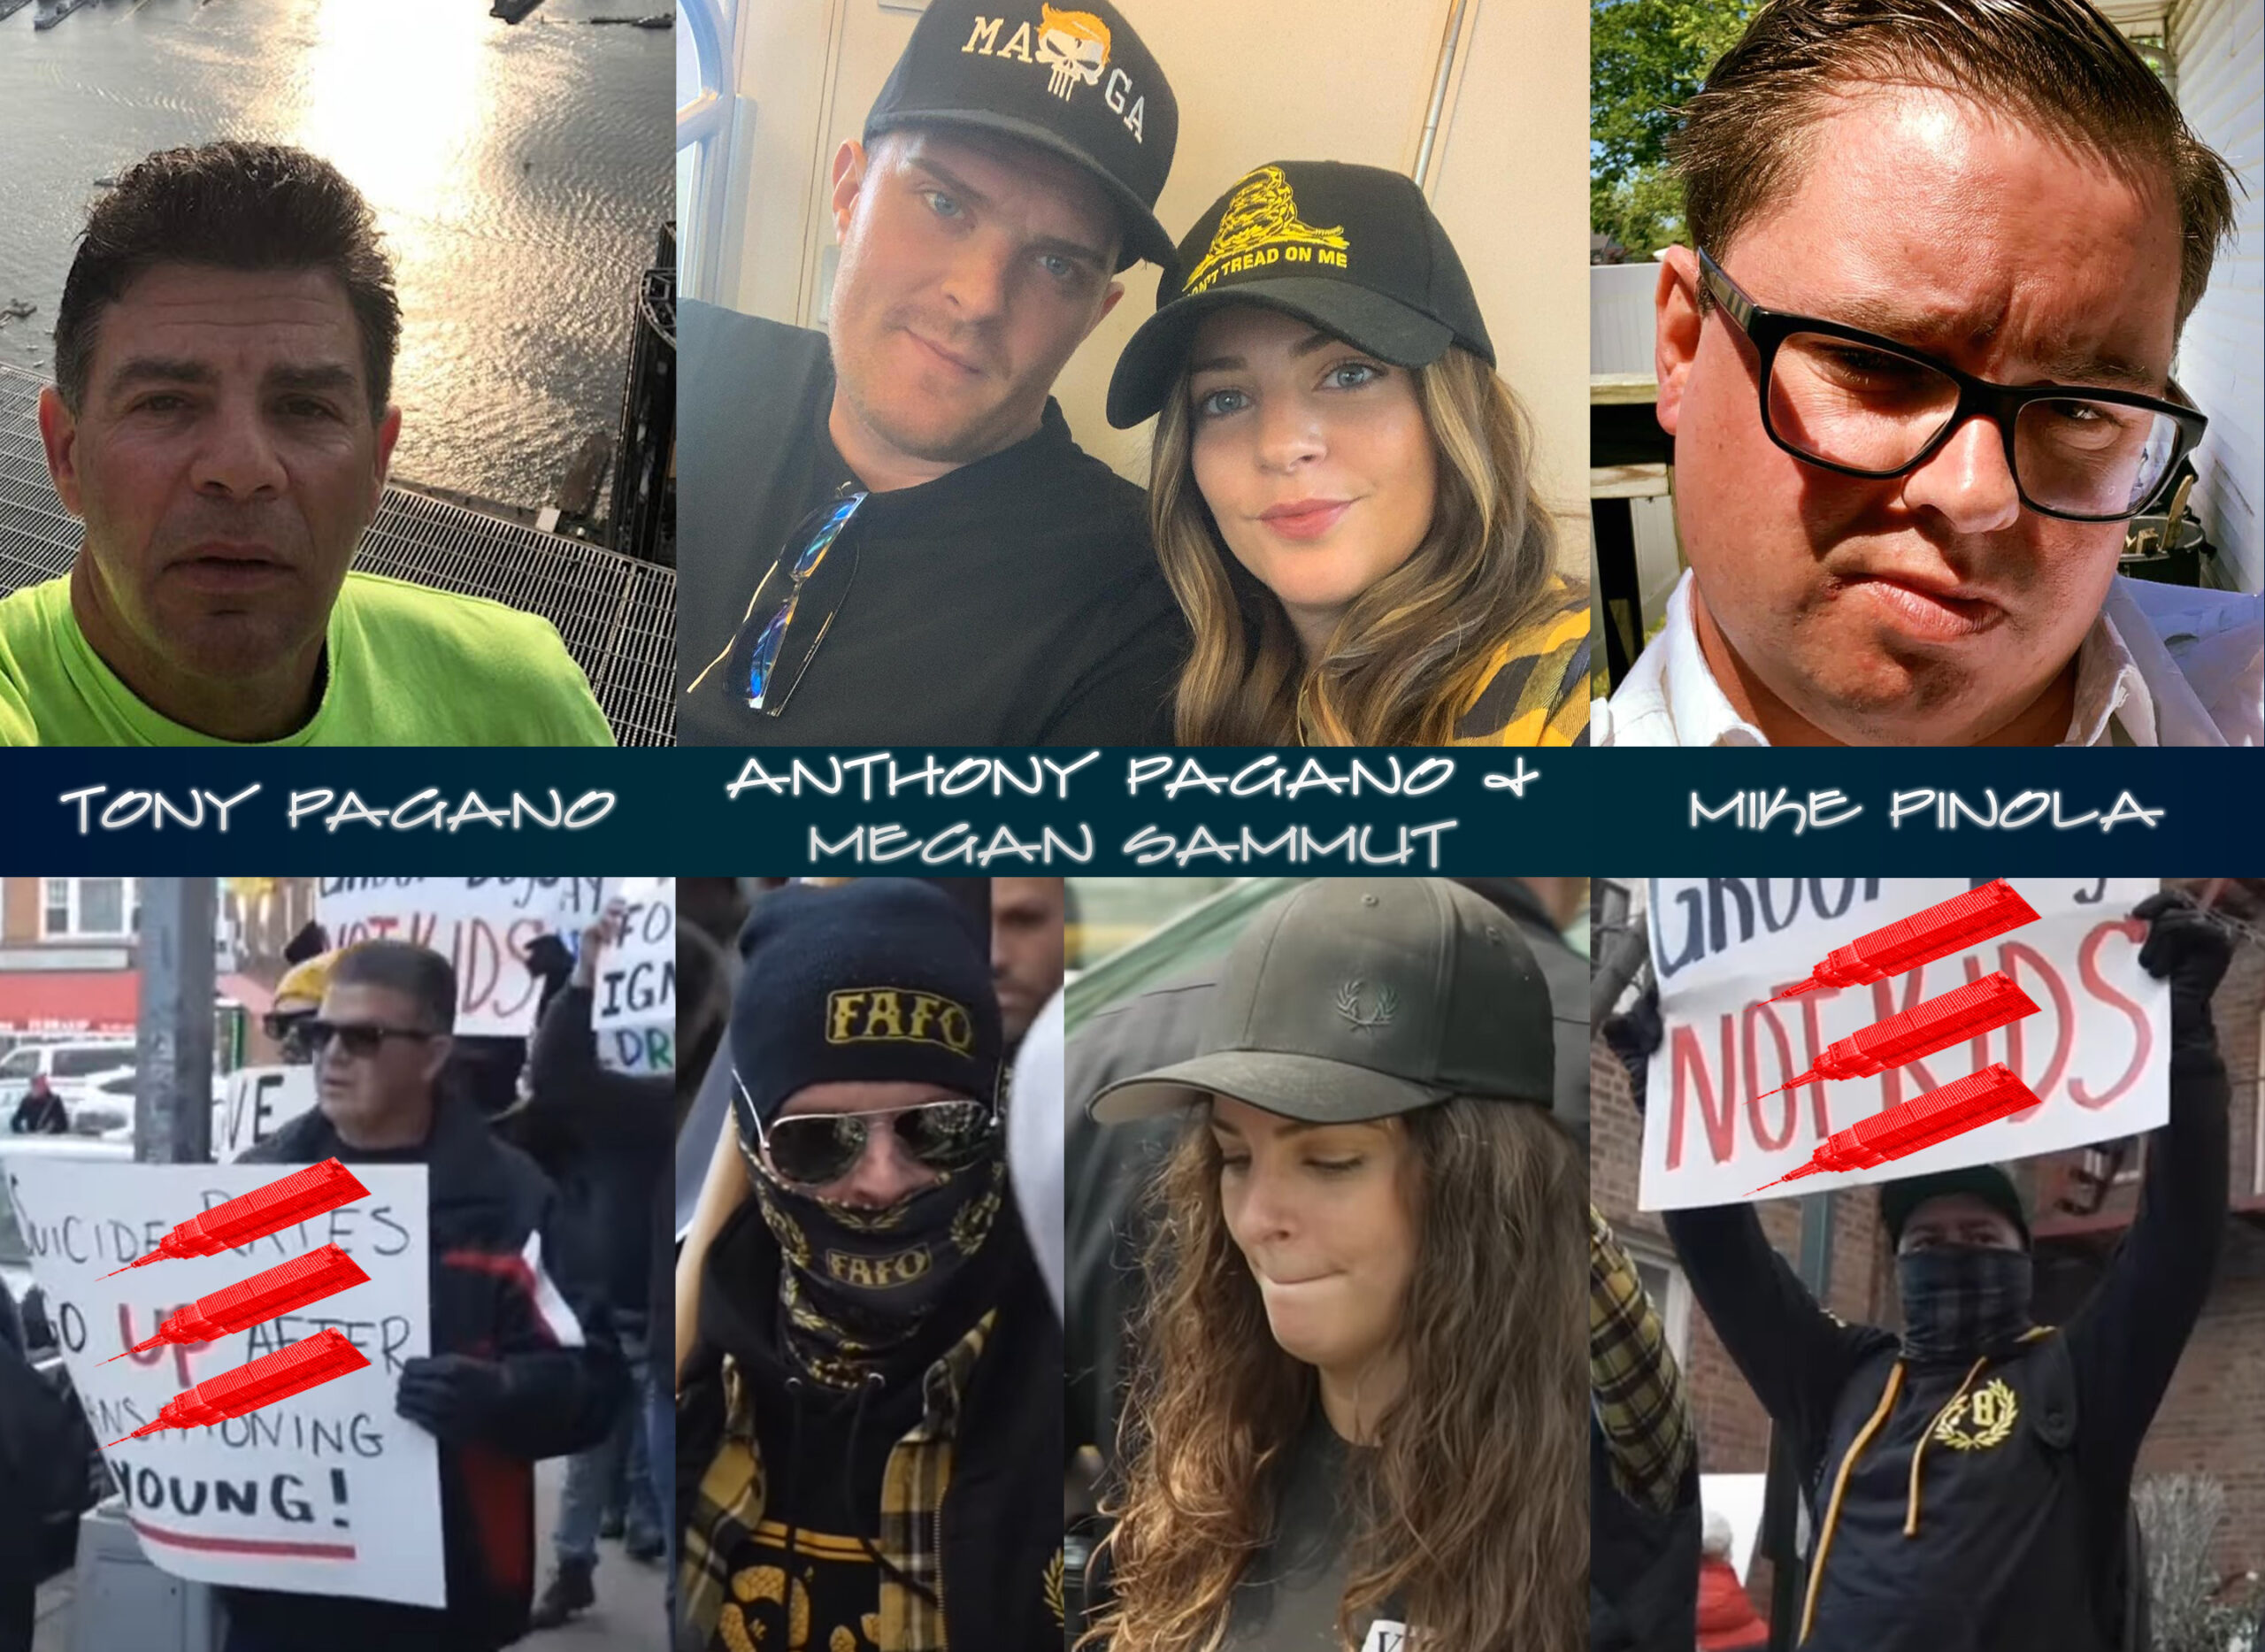 Photos of Tony (Sr.) and Anthony (Jr.) Pagano, Megan Sammut, and Mike Pinola with and without face coverings in personal photos and at protests.